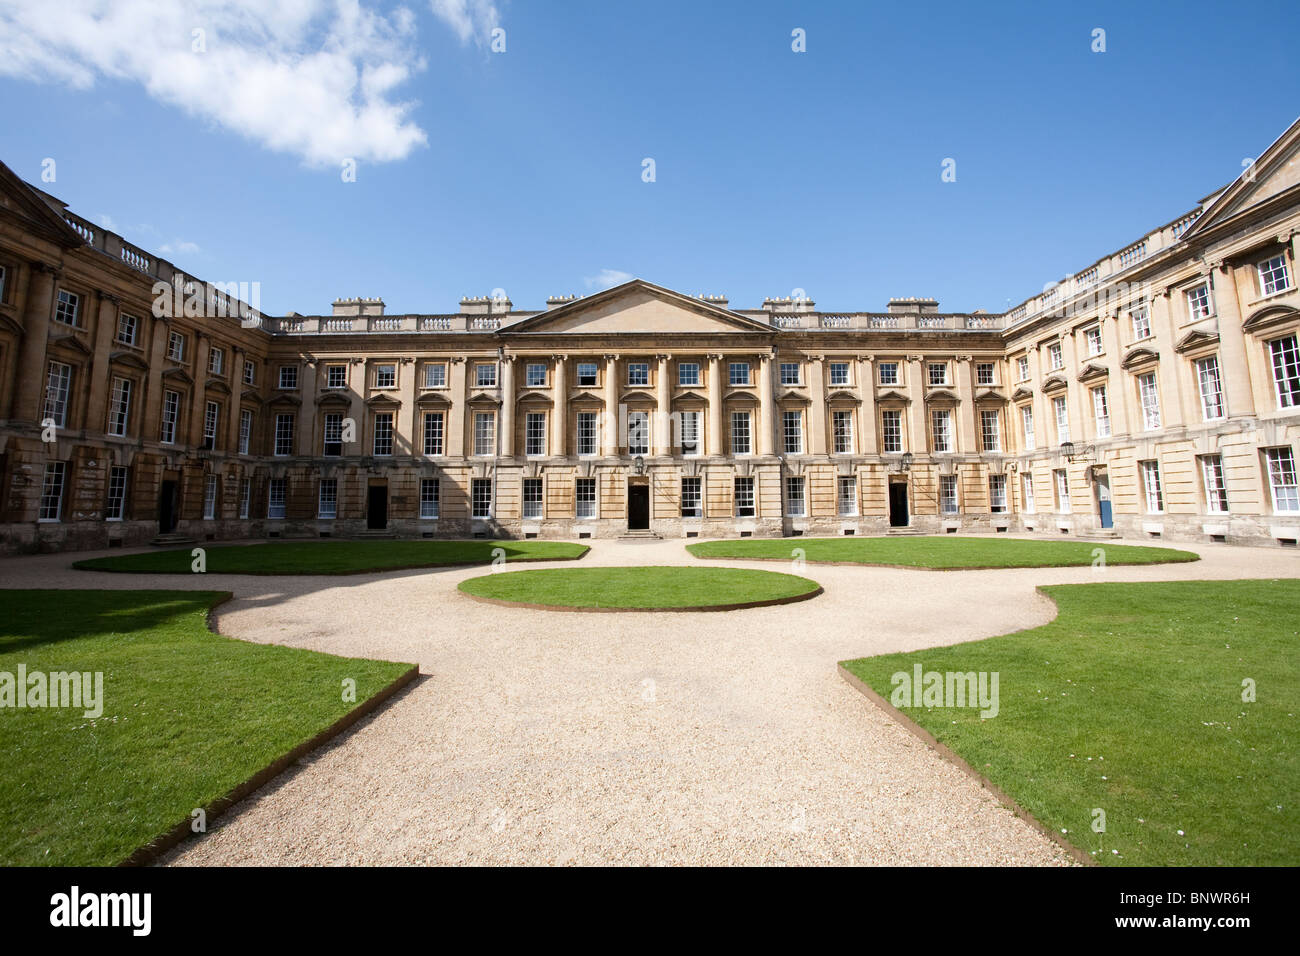 Image shows The Peckwater Quadrangle, designed by Henry Aldrich, at Christ Church, Oxford, England.Photo:Jeff Gilbert Stock Photo